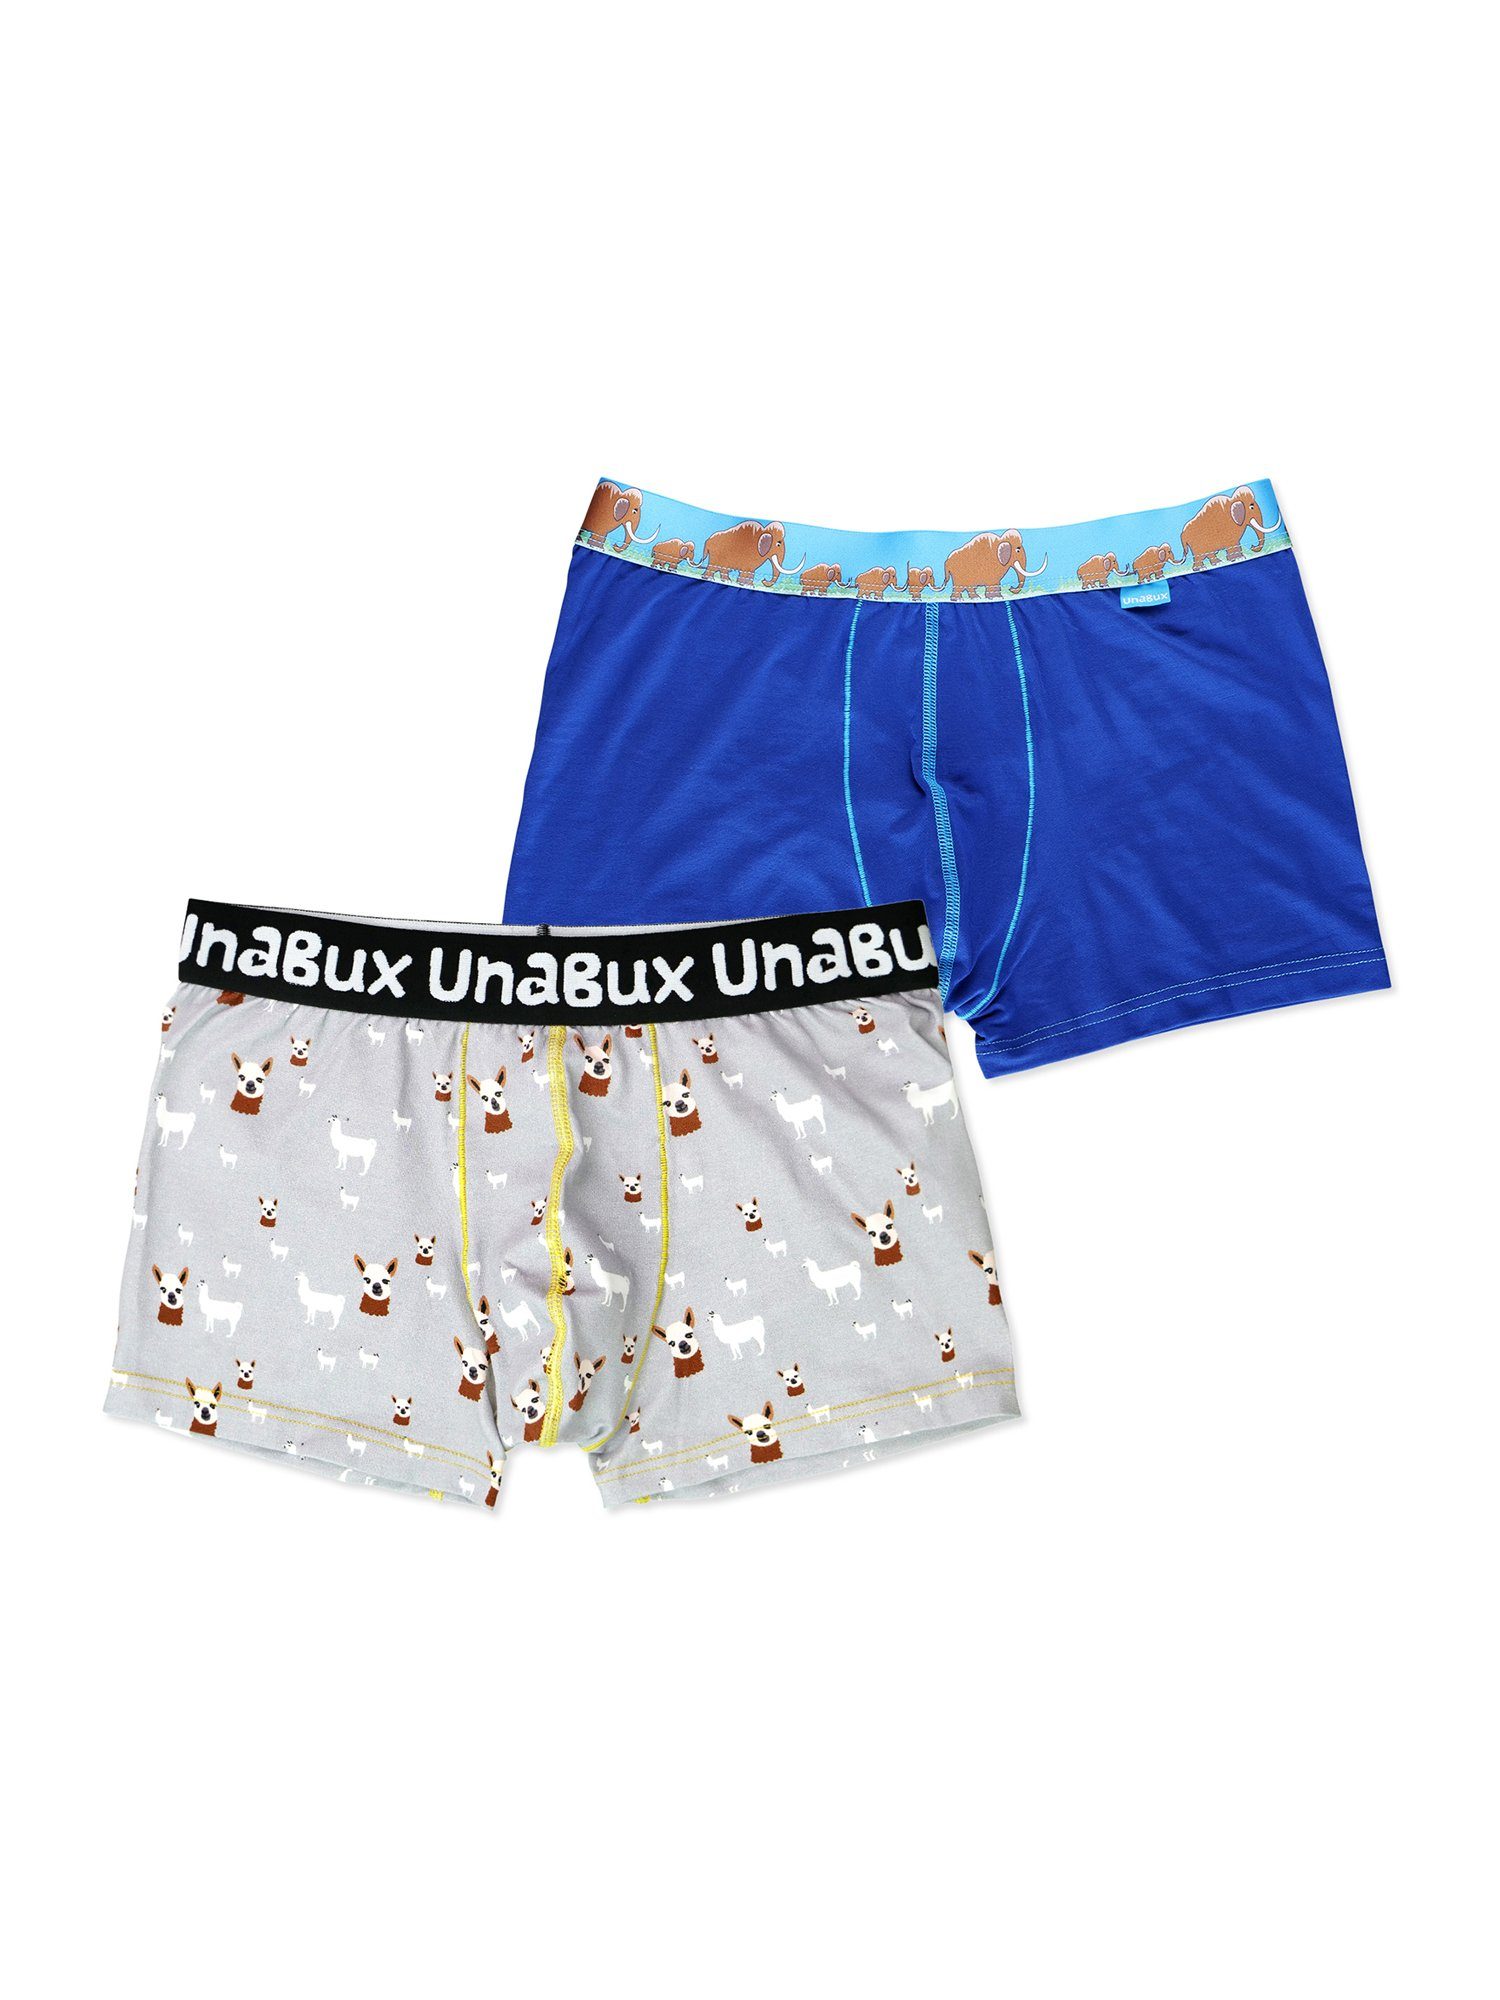 UnaBux Boxer Briefs WOOLHEAD / Boxershorts HIKE FINGERS Doppelpack MAMOUTH (2-St) FIVE